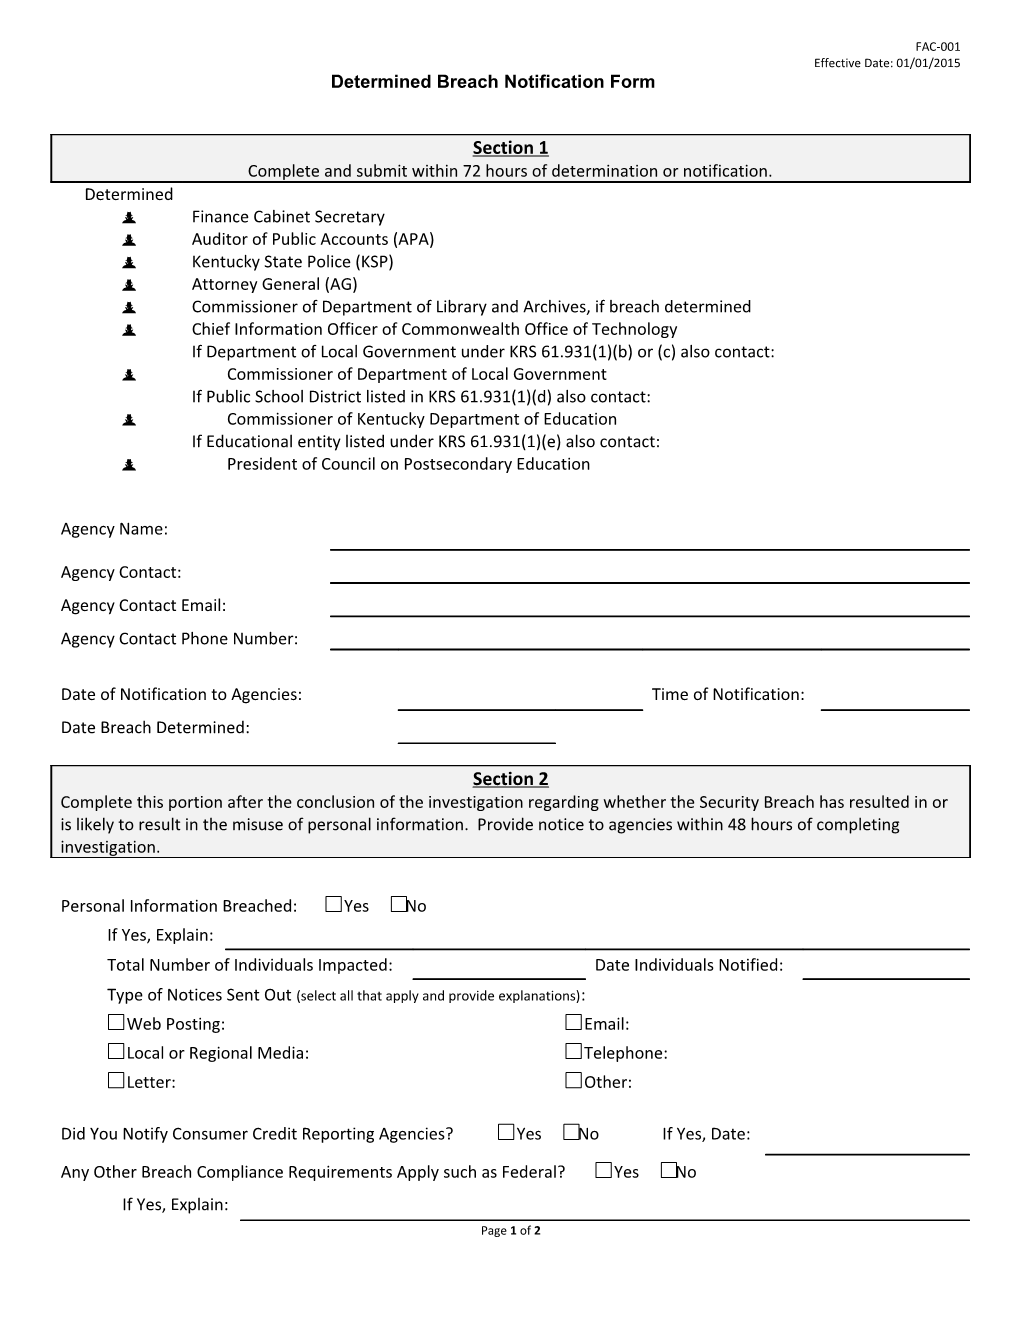 Determined Breach Notification Form